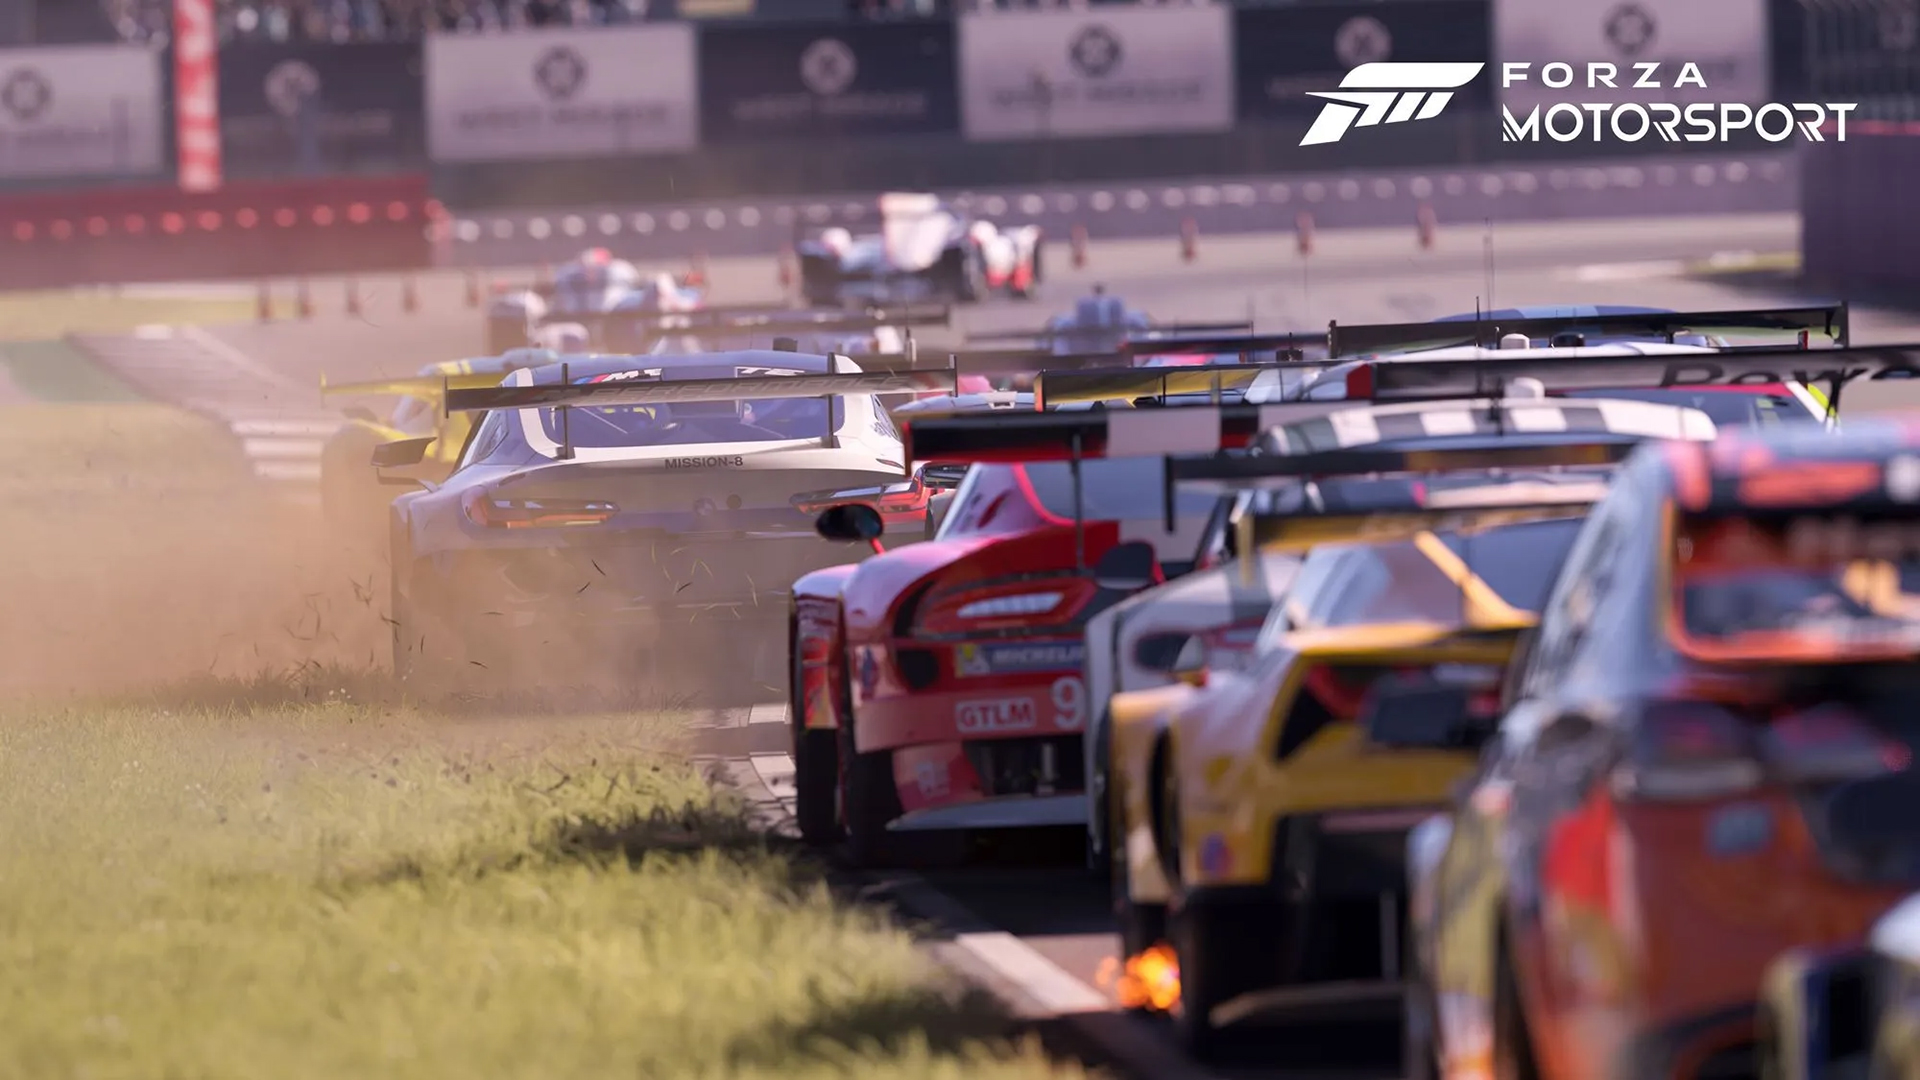 To what extent does Forza Motorsport on PC improve over consoles